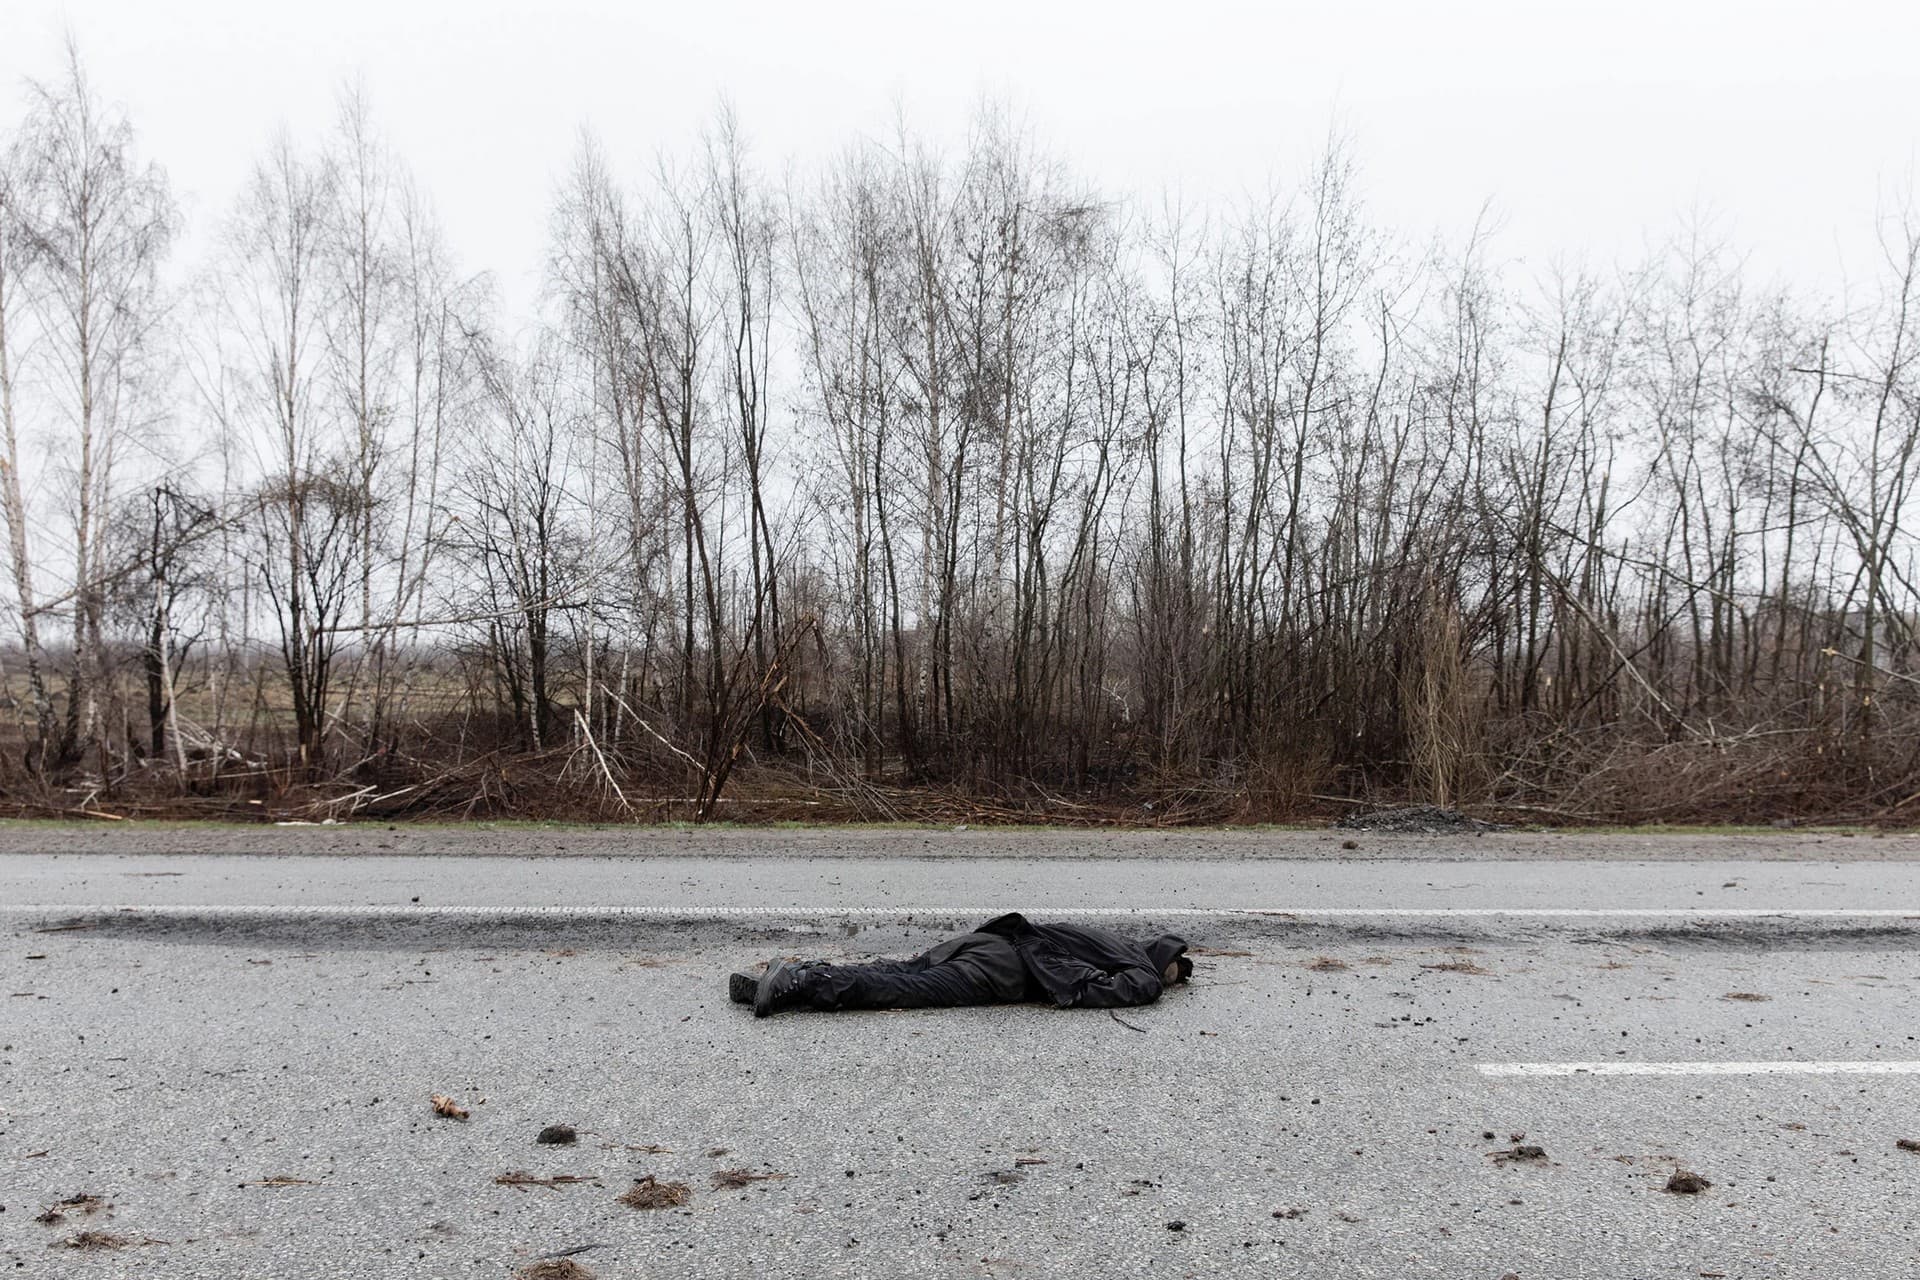 A body is seen on a highway 20 kilometers from Kyiv